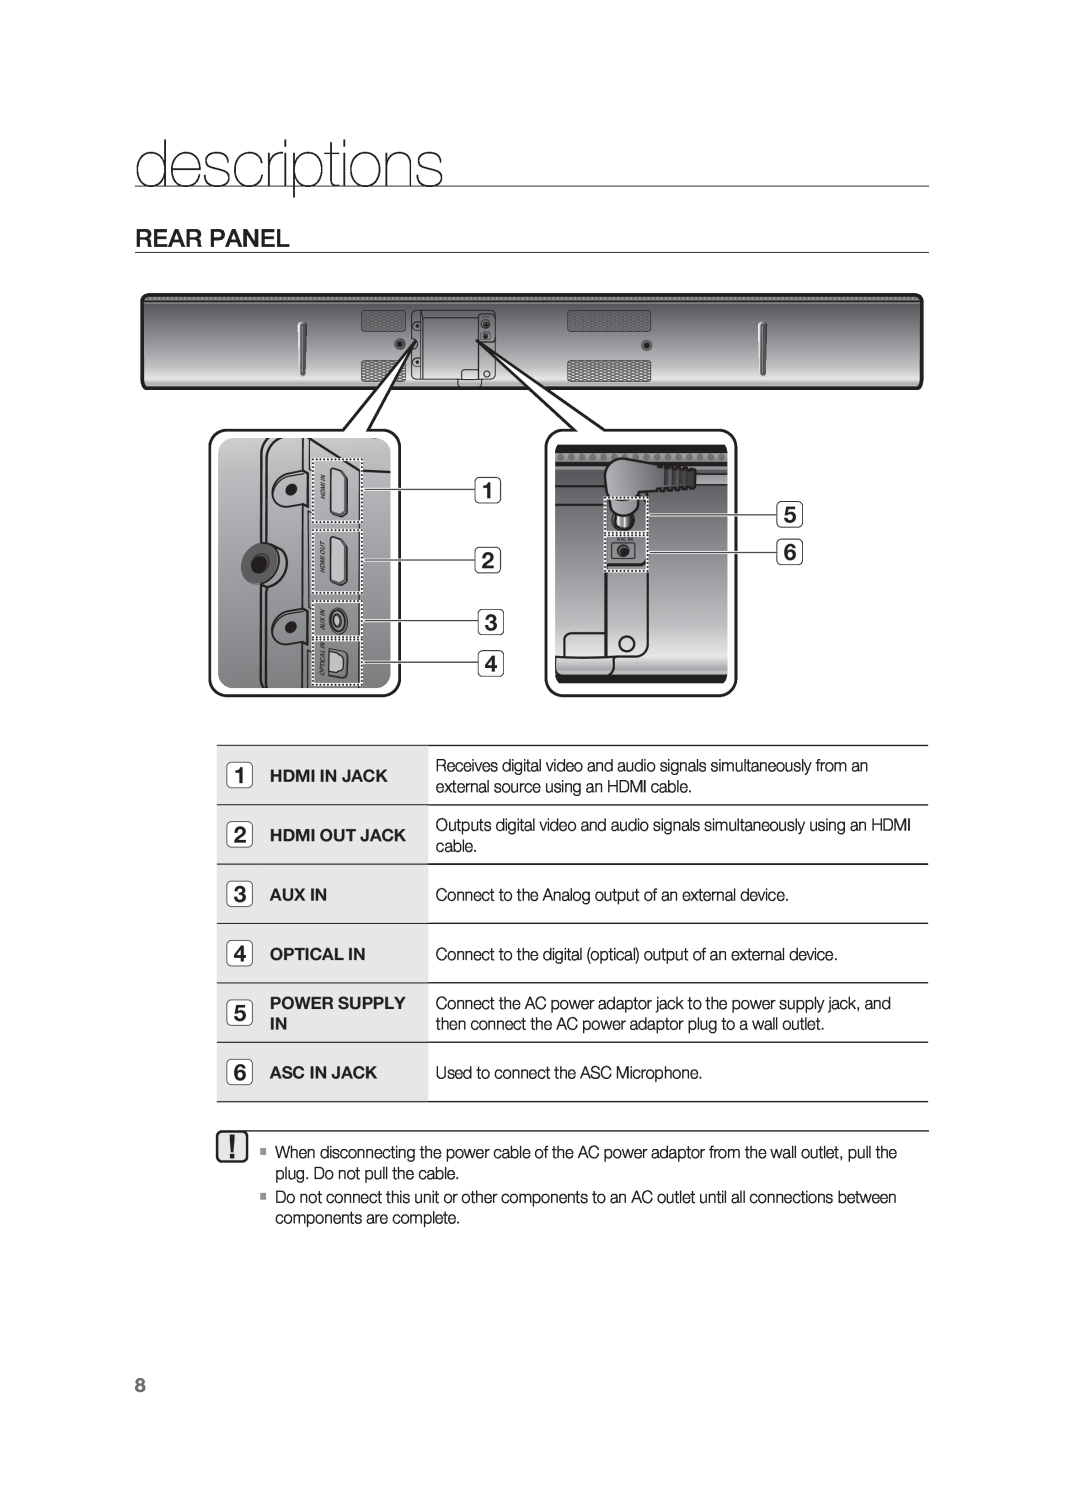 Samsung HW-F850/ZA user manual Rear Panel, 1 2 3, descriptions, Hdmi In Jack, Hdmi Out Jack, Aux In, Optical In 